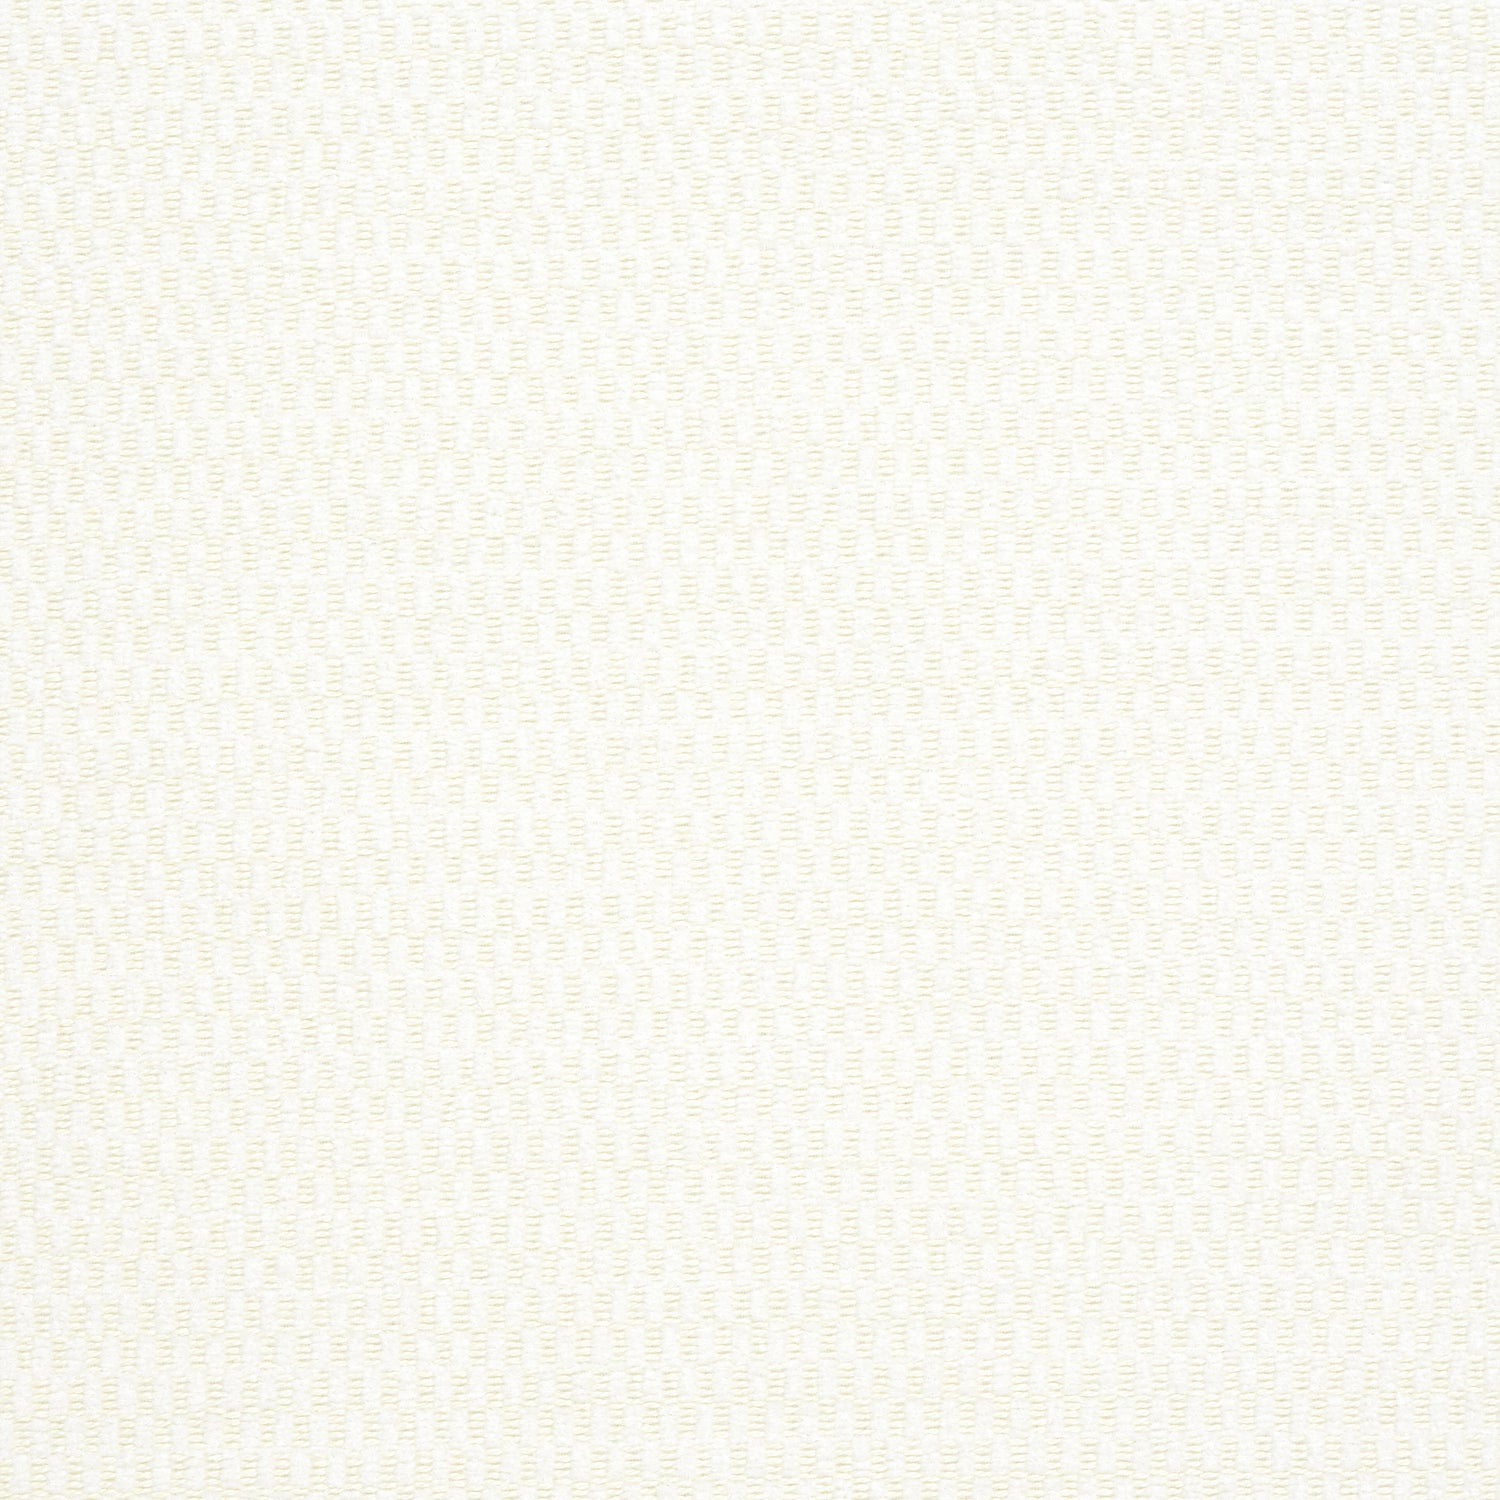 Block Texture fabric in snow white color - pattern number W74244 - by Thibaut in the Passage collection